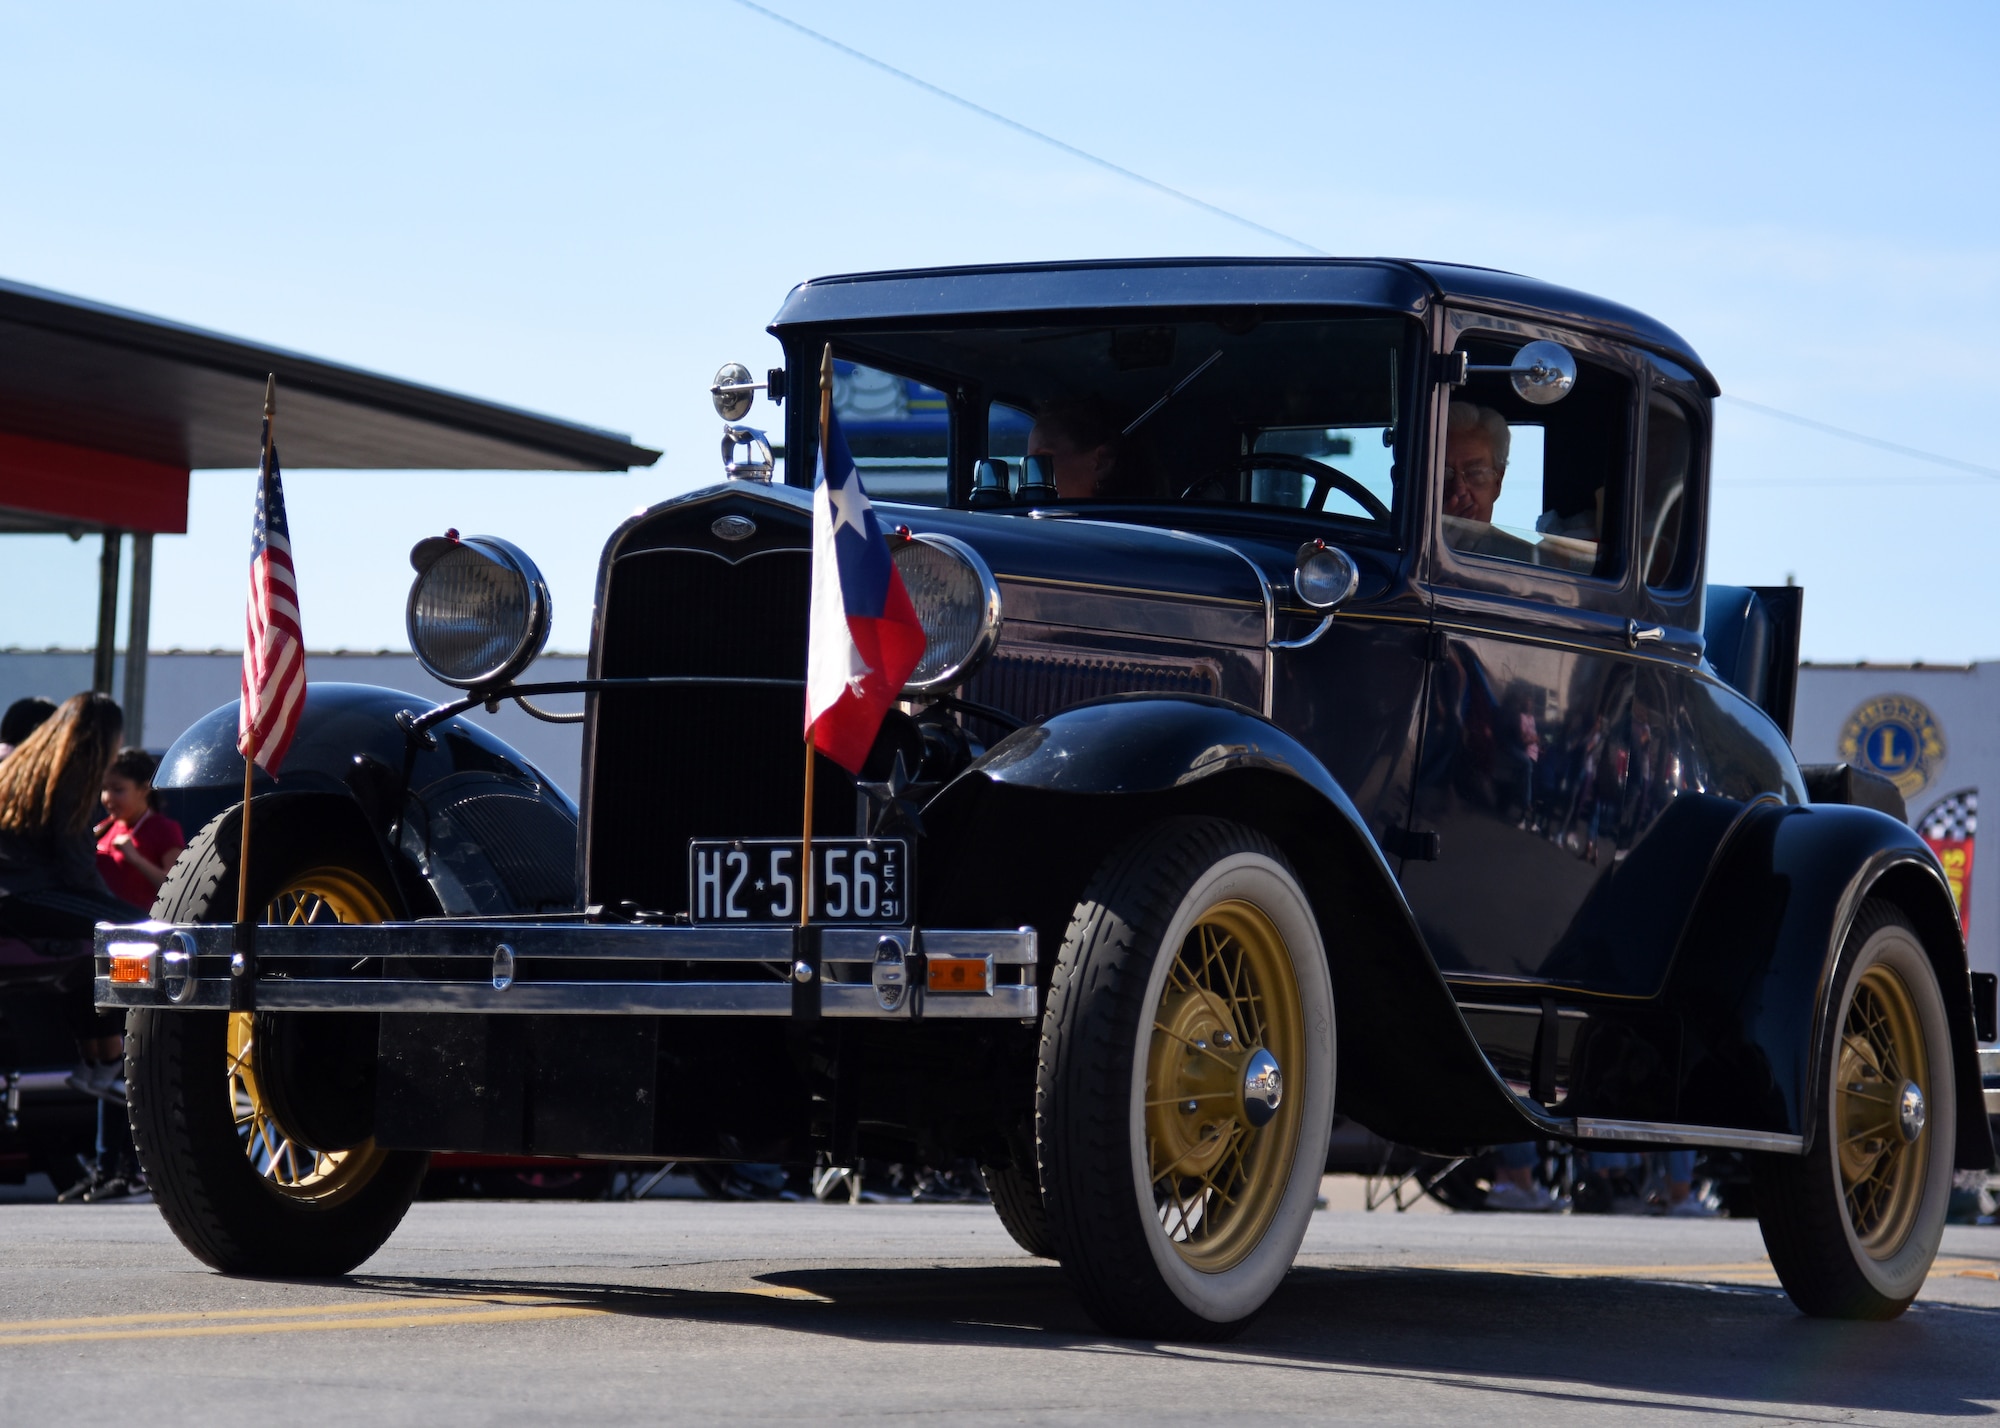 A Ford Model A is driven by a veteran in the Veterans Day Parade in San Angelo, Texas, Nov. 9, 2019. Veterans from several wars, active duty military, supporters of the U.S. military, and others took part in the parade to honor those who have served. (U.S. Air Force photo by Airman 1st Class Ethan Sherwood/Released)